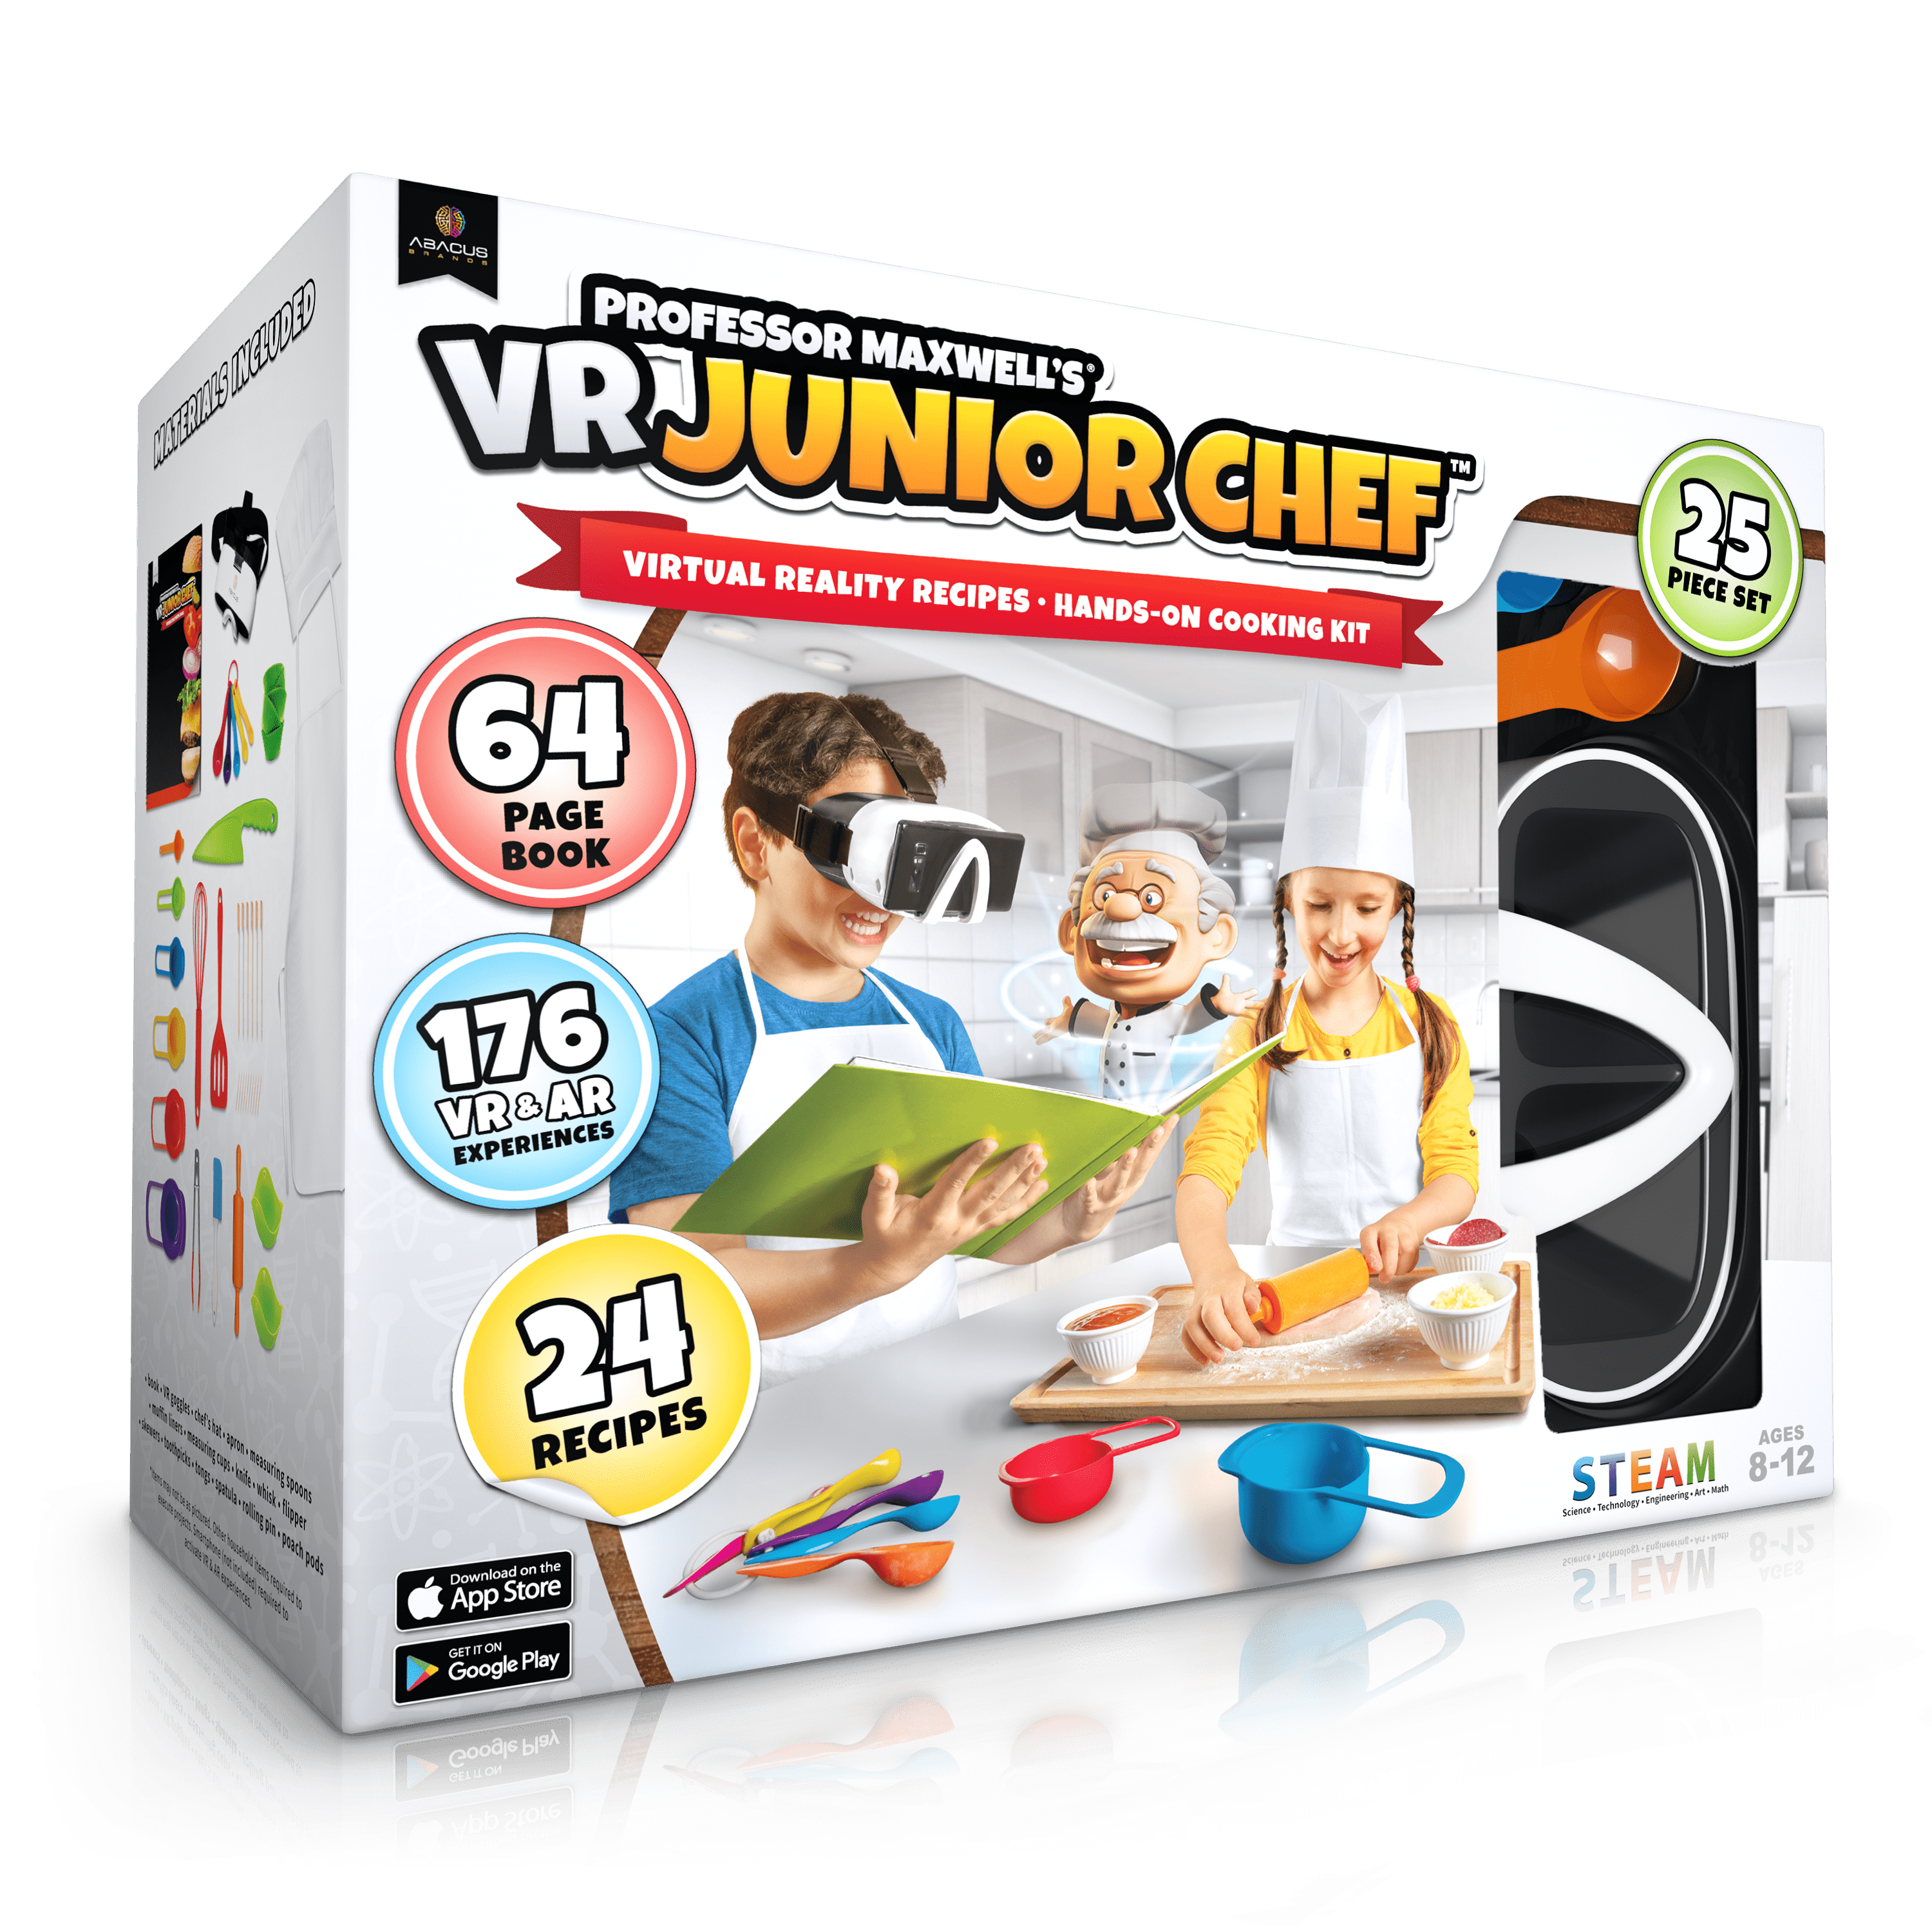 Kids Cooking Kits that have everything needed for a cooking experience.